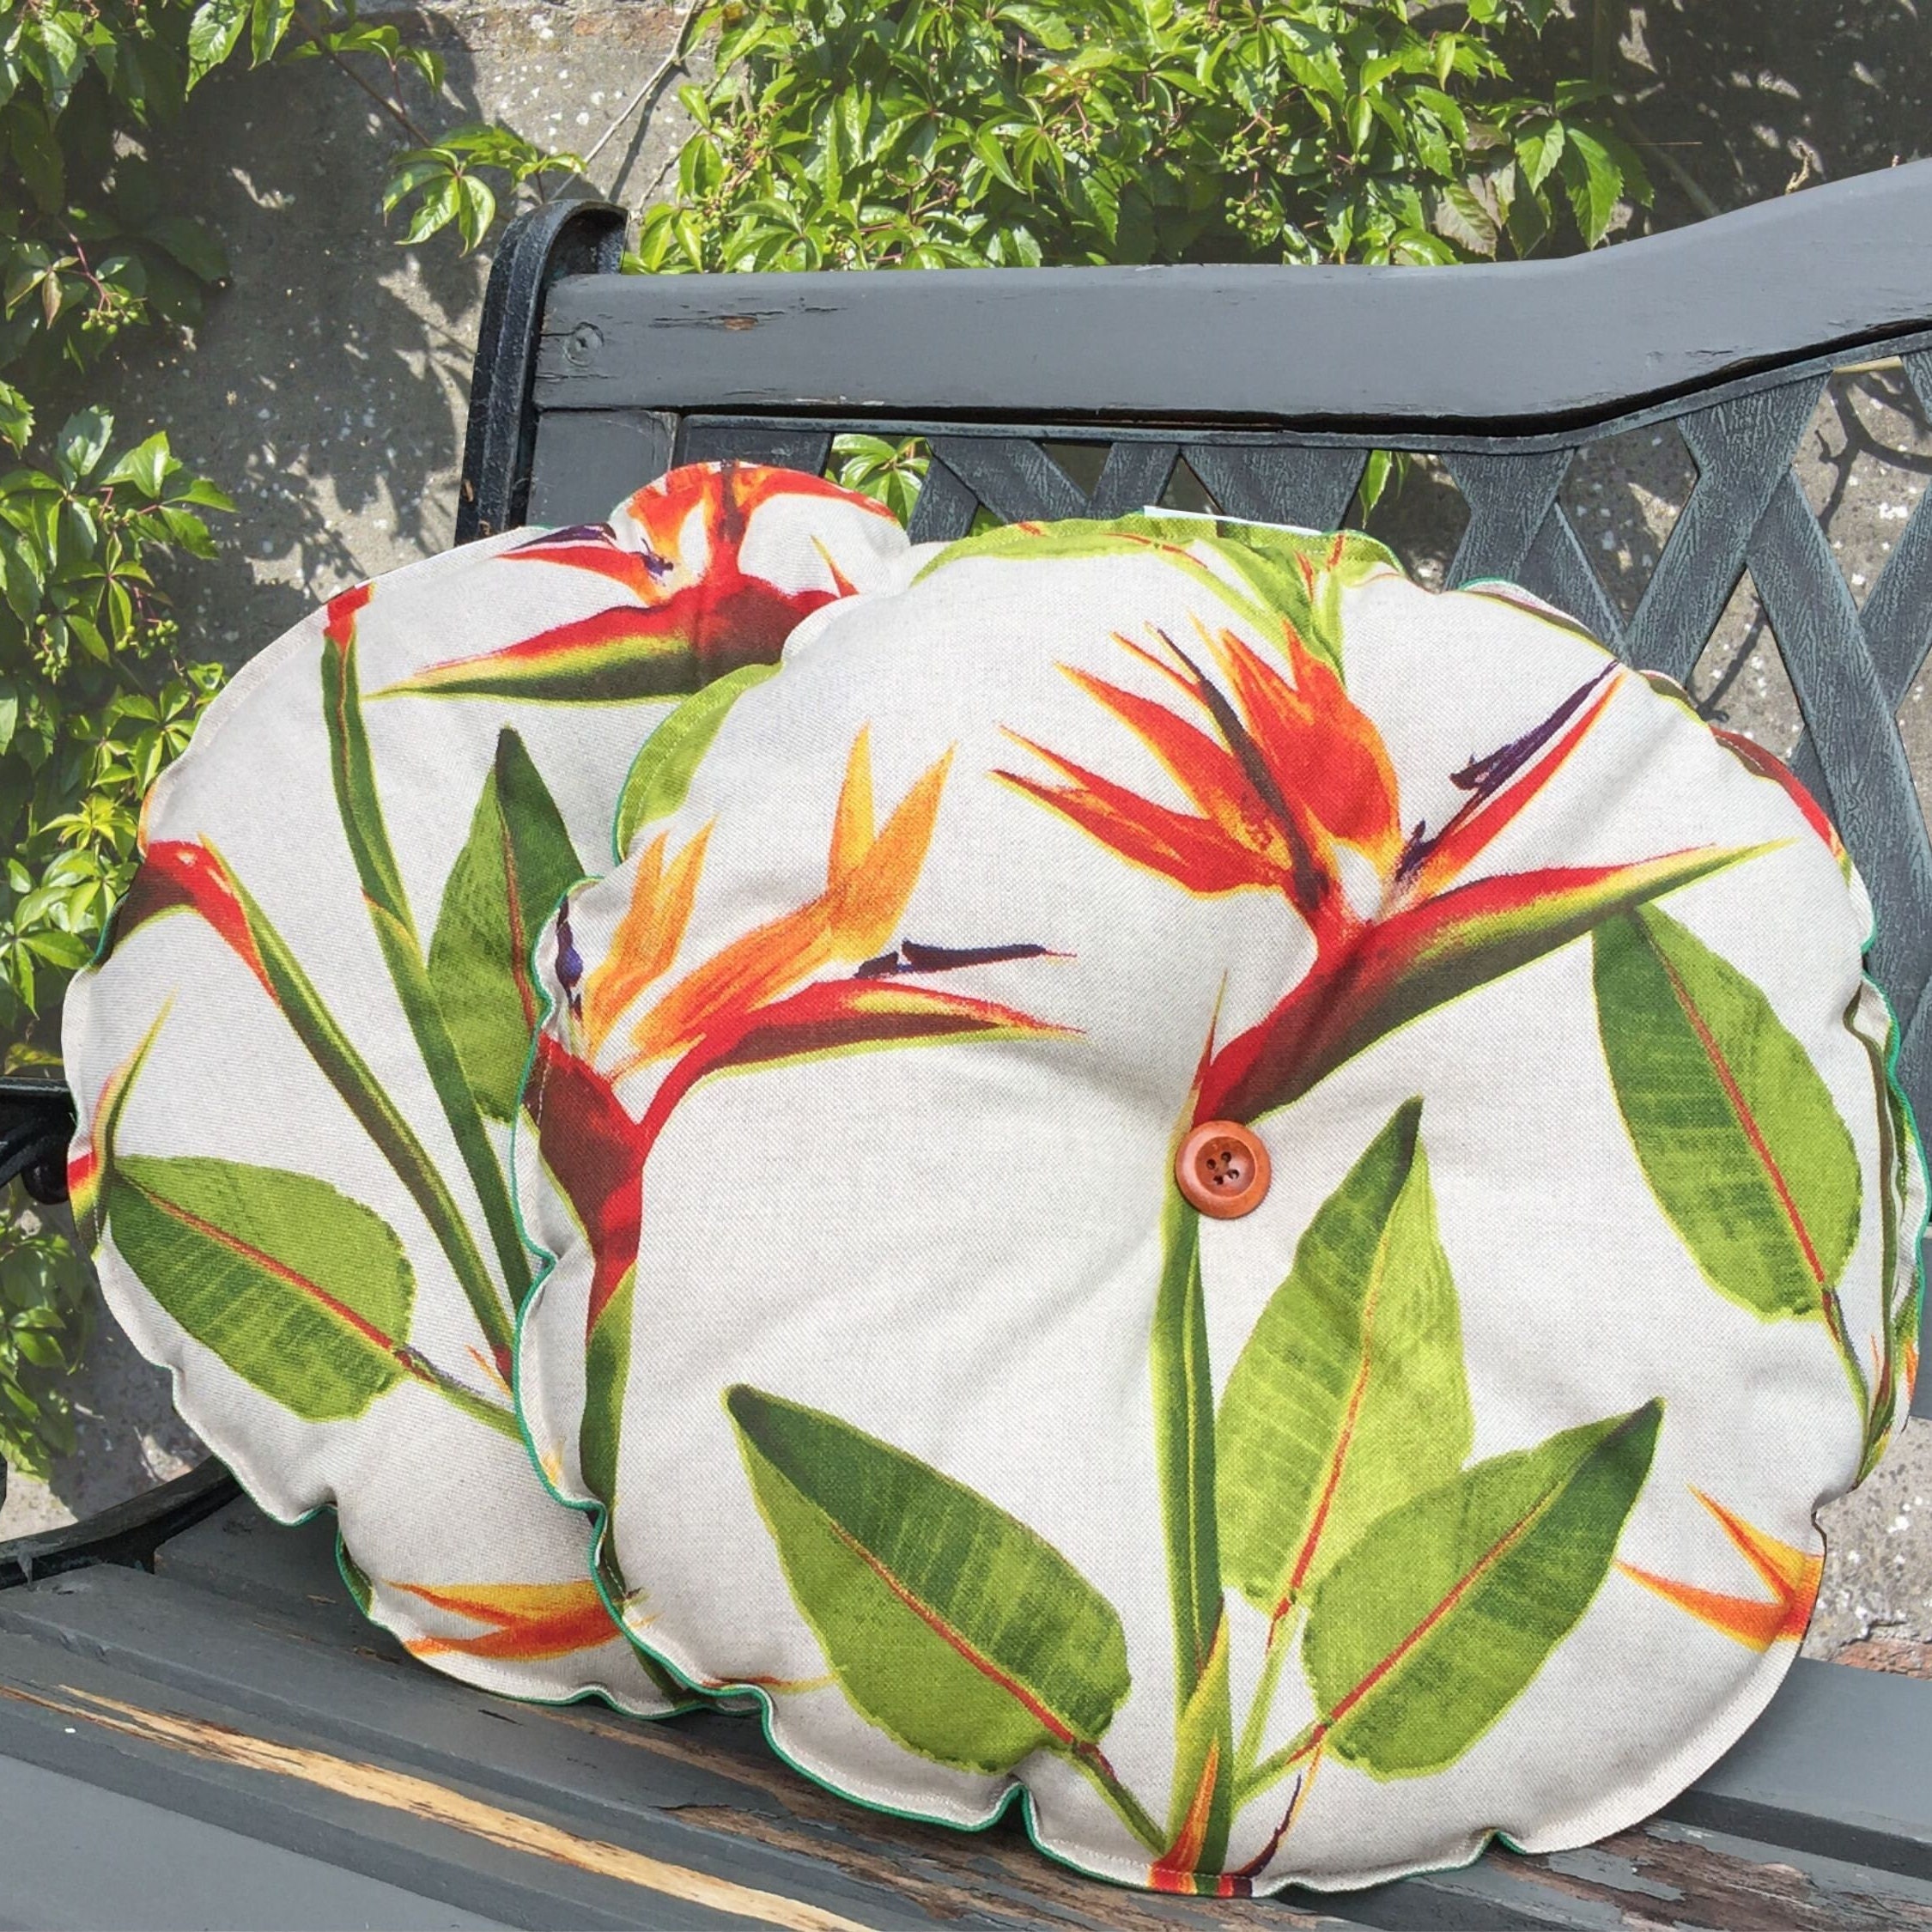  Outdoor Deep Seat Cushion Set Back Cushion Tropical Neon Palm  Leaves Seamless Jungle Purple Colored Floral Summer Lounge Chairs  Conversation Cushion Replacement Cushion for Patio Furniture All Weather :  Patio, Lawn